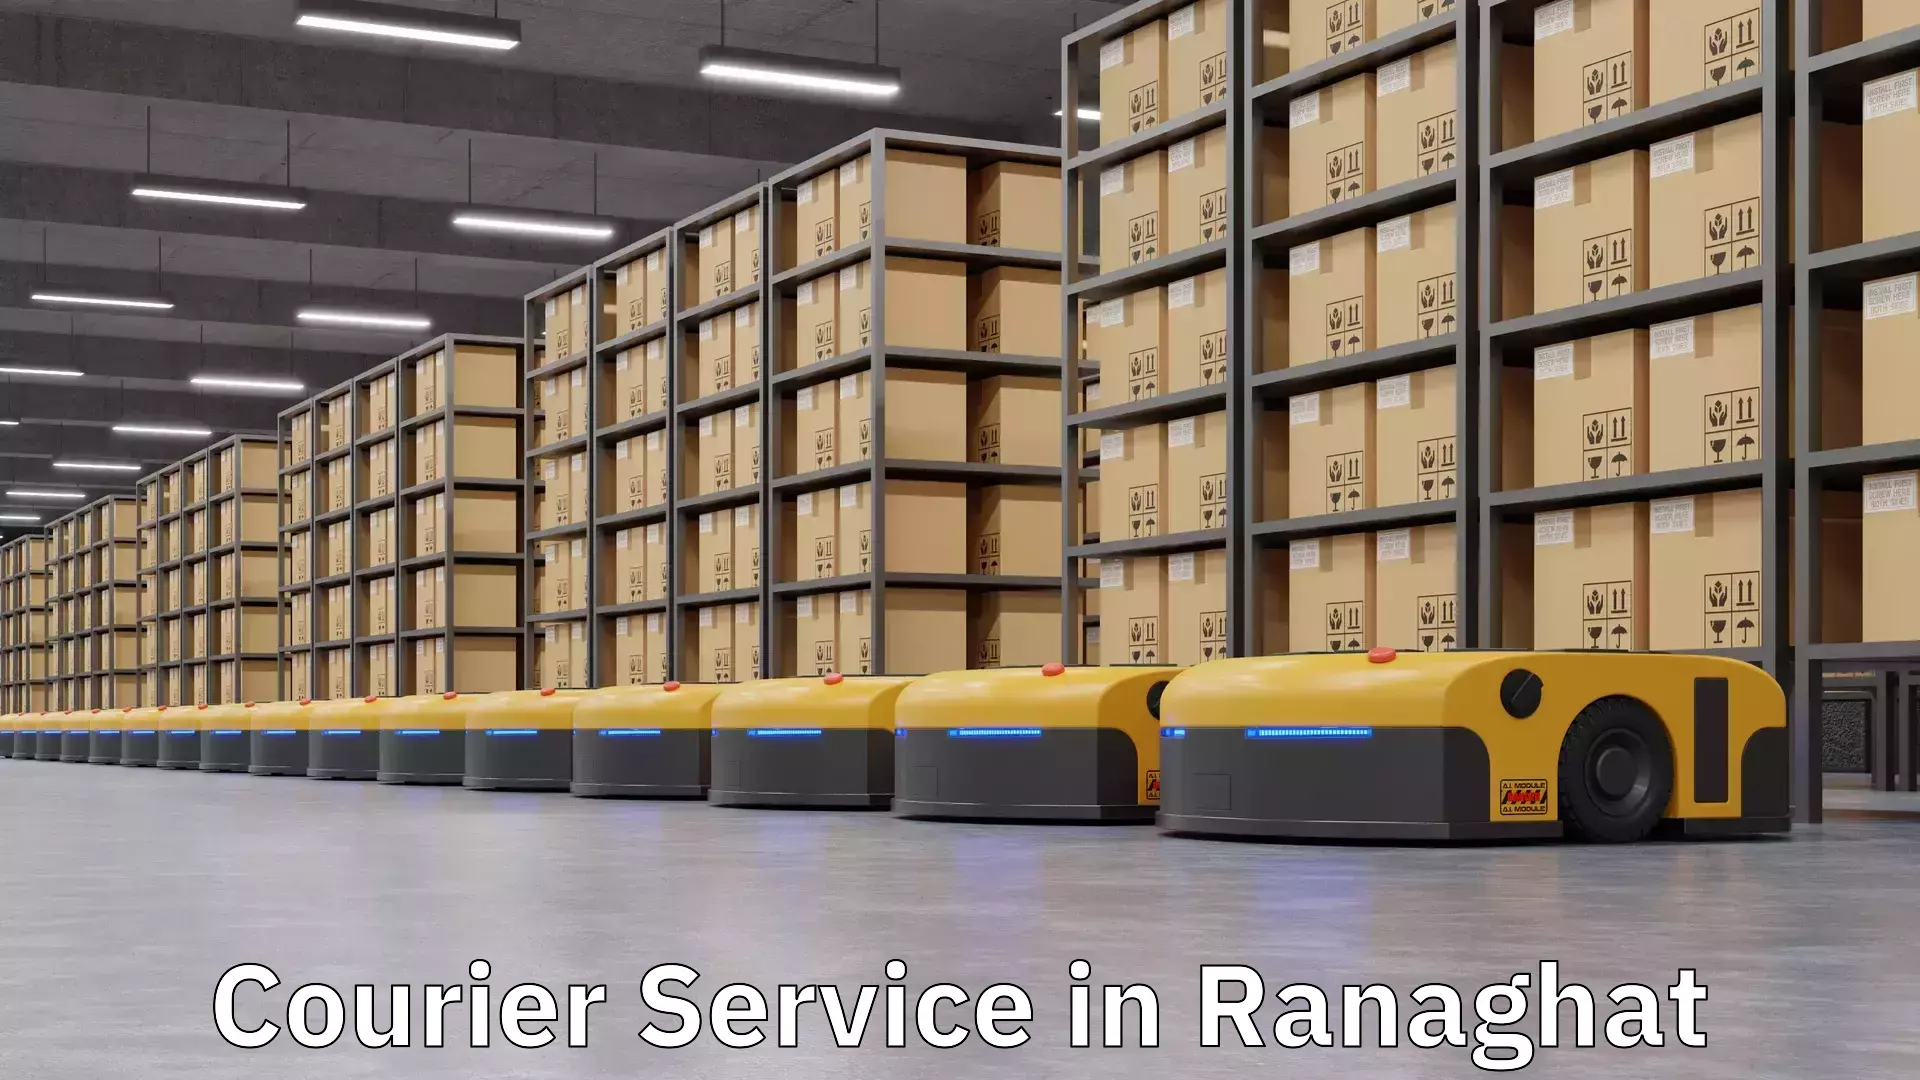 Tailored shipping services in Ranaghat